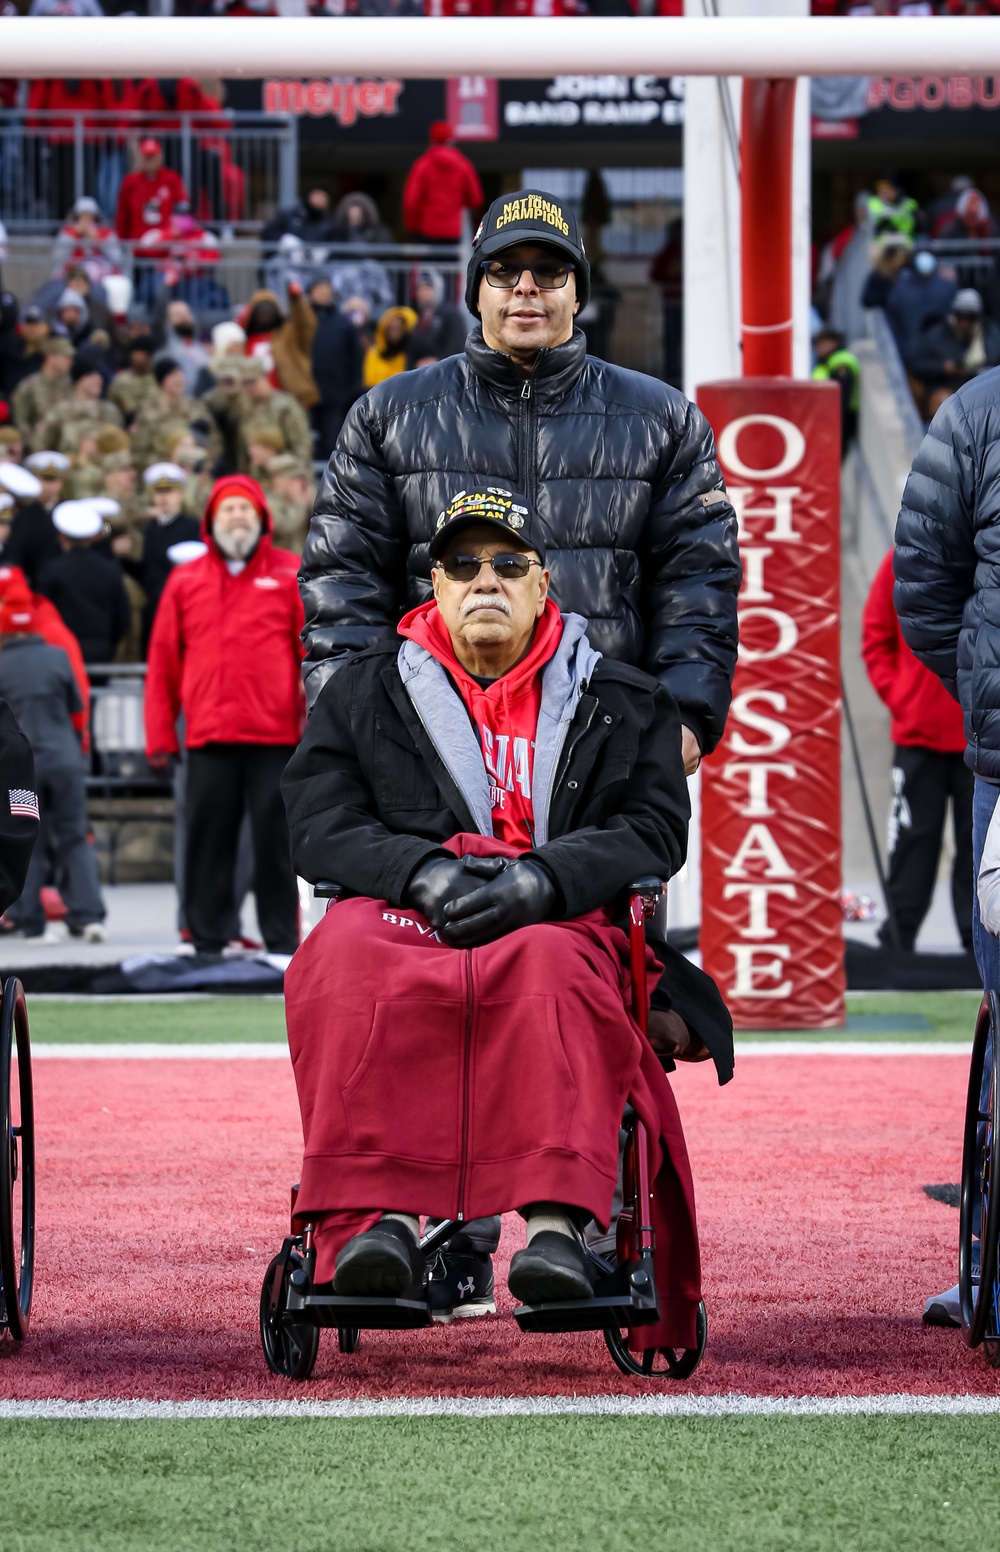 Ohio National Guardsmen, recruits, and veterans honored at OSU Military Appreciation Game